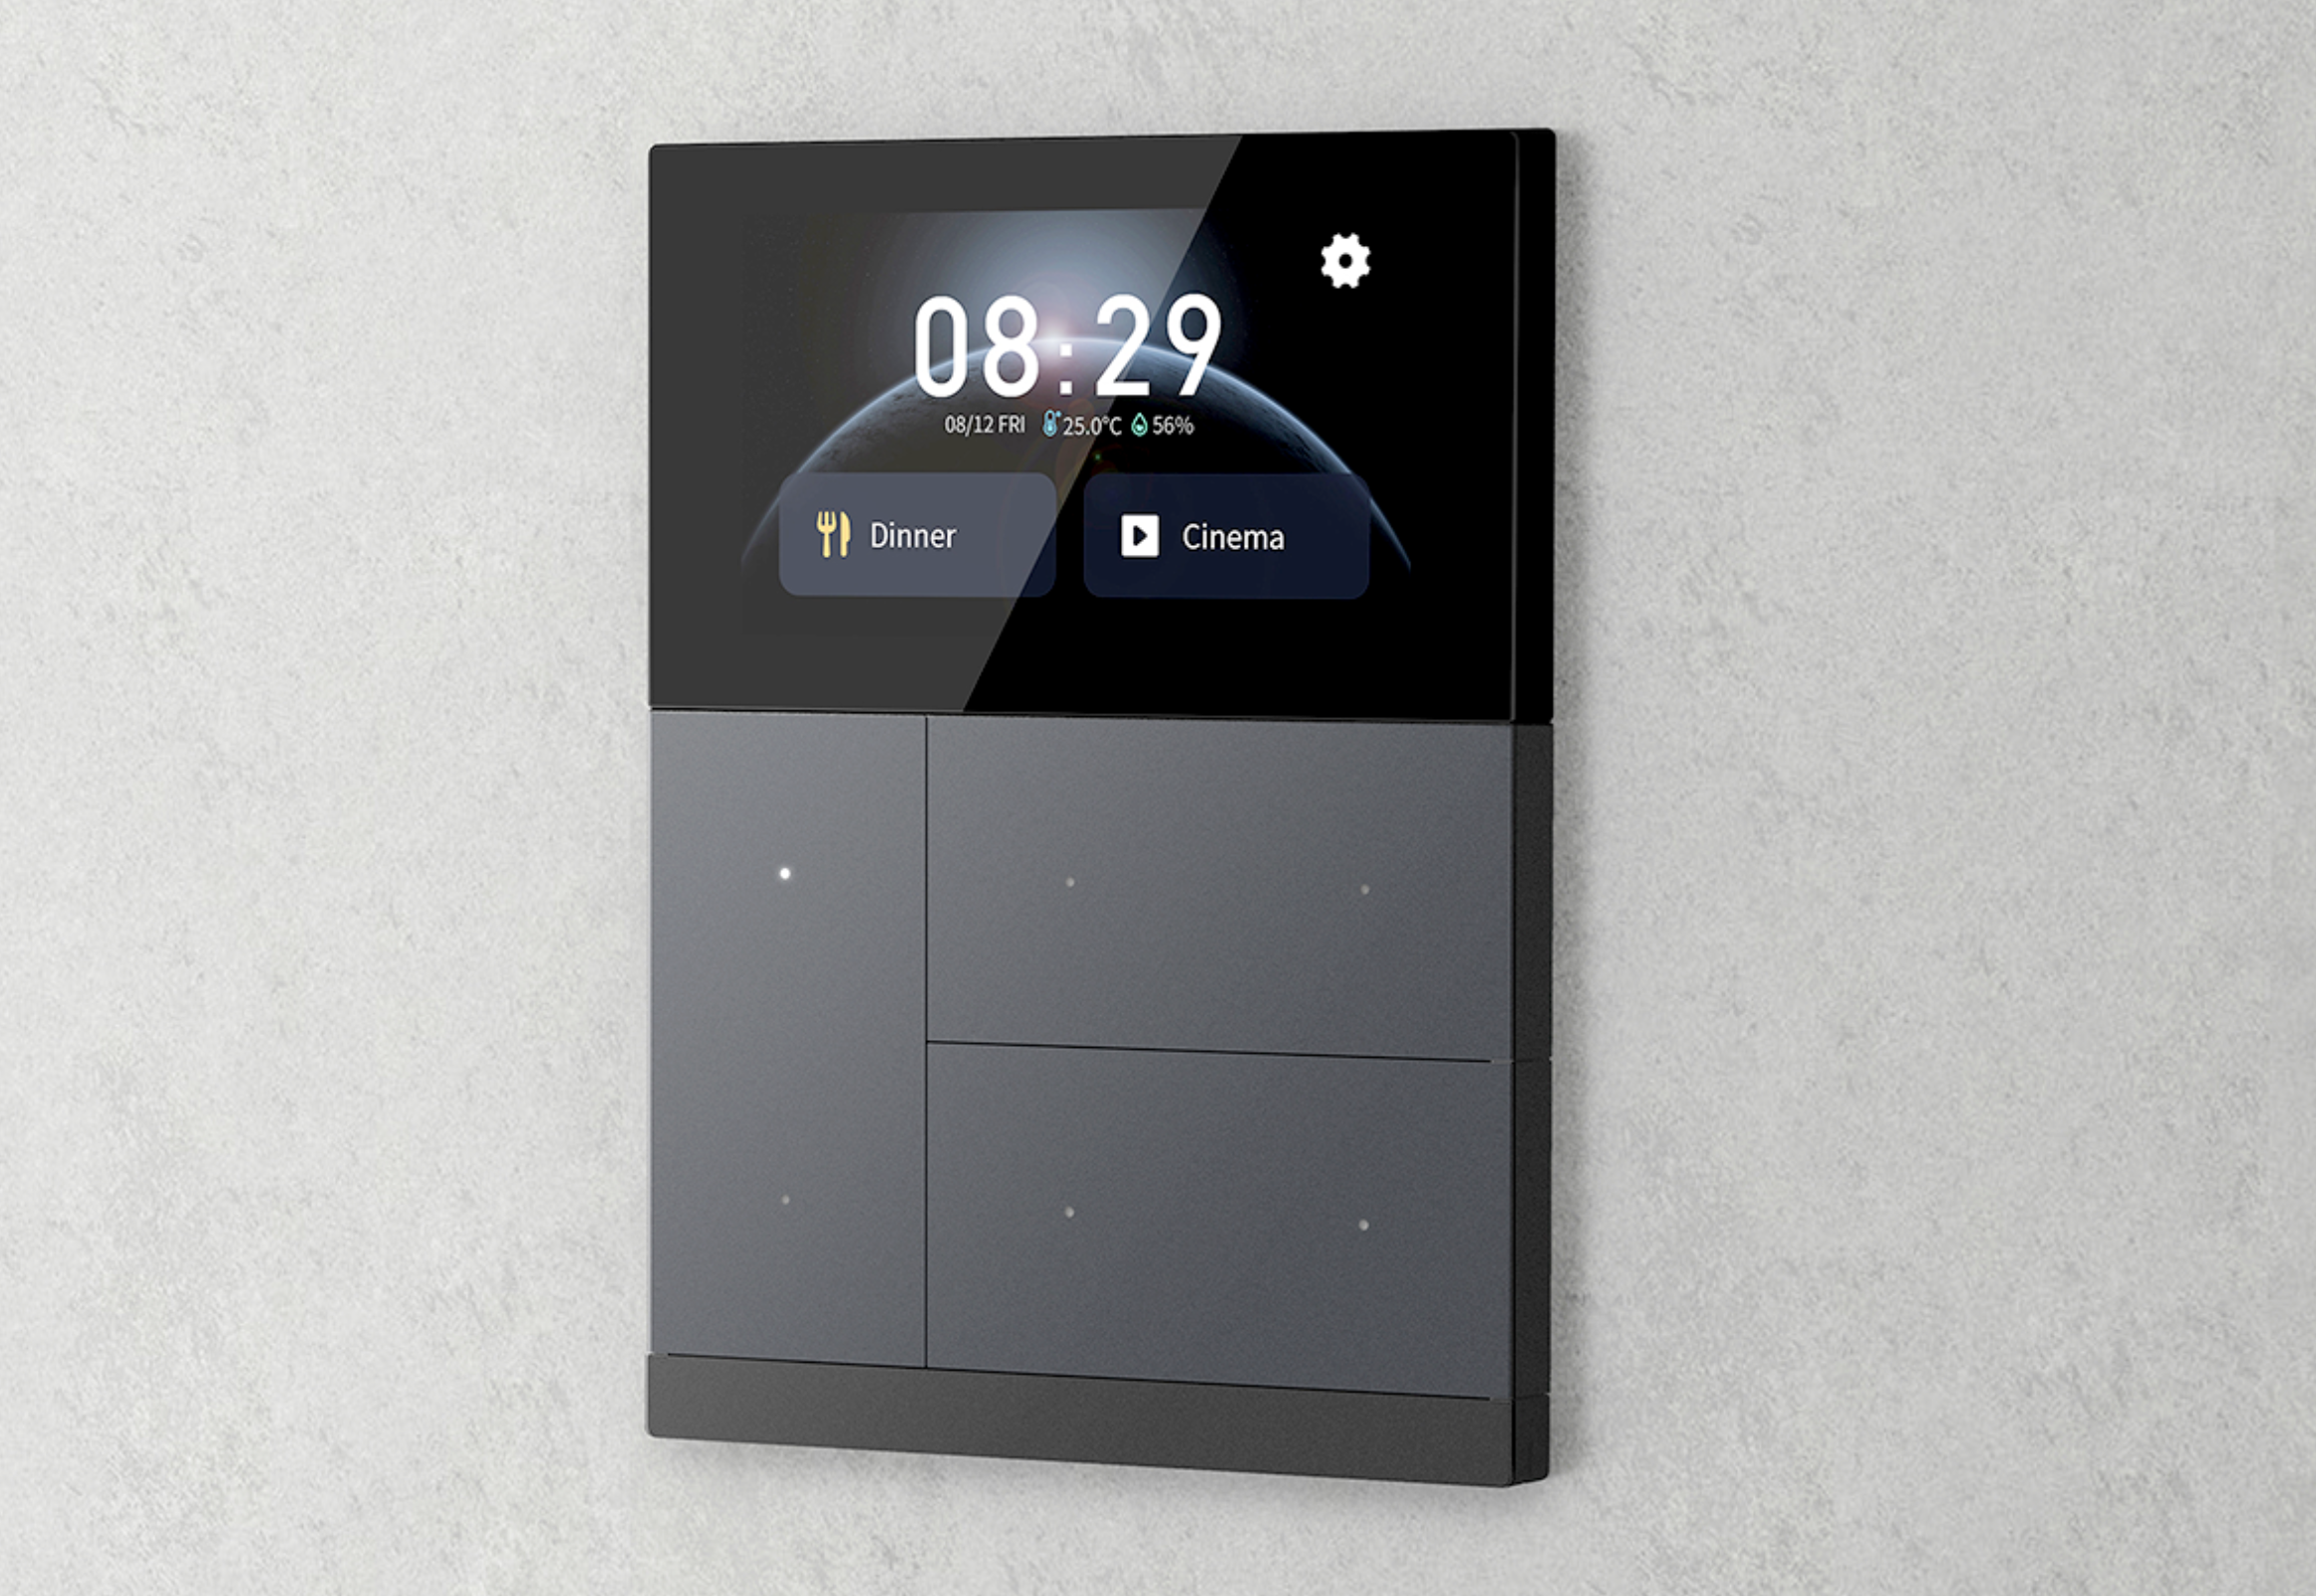 KNX Controller Touch & Pad, Metal, Black IPS capacitive touch panel & mechanical button